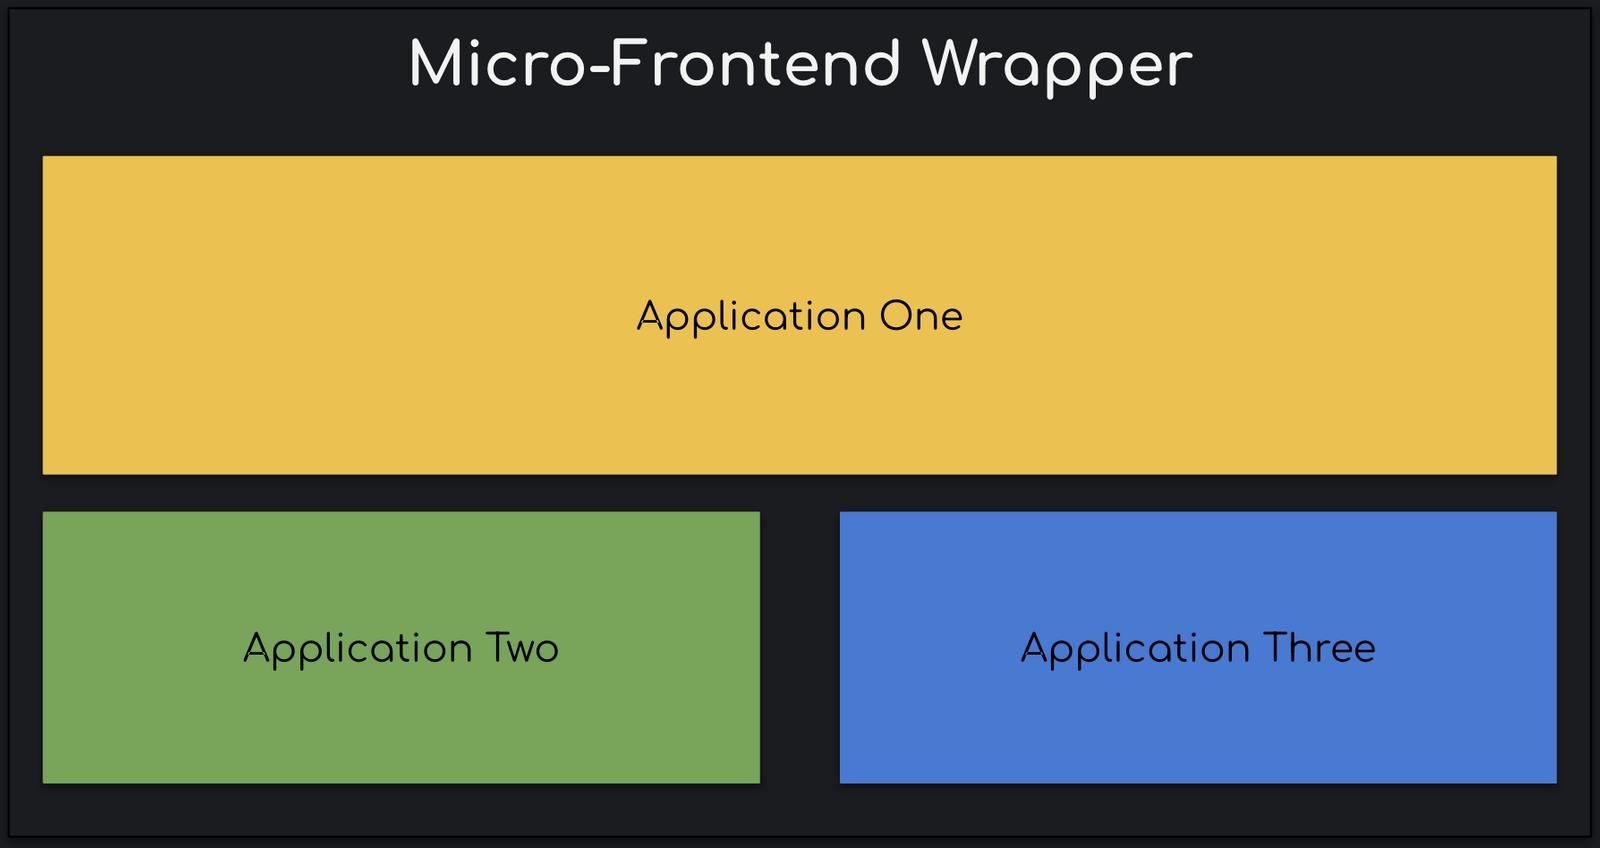 Micro-Frontend Wrapper